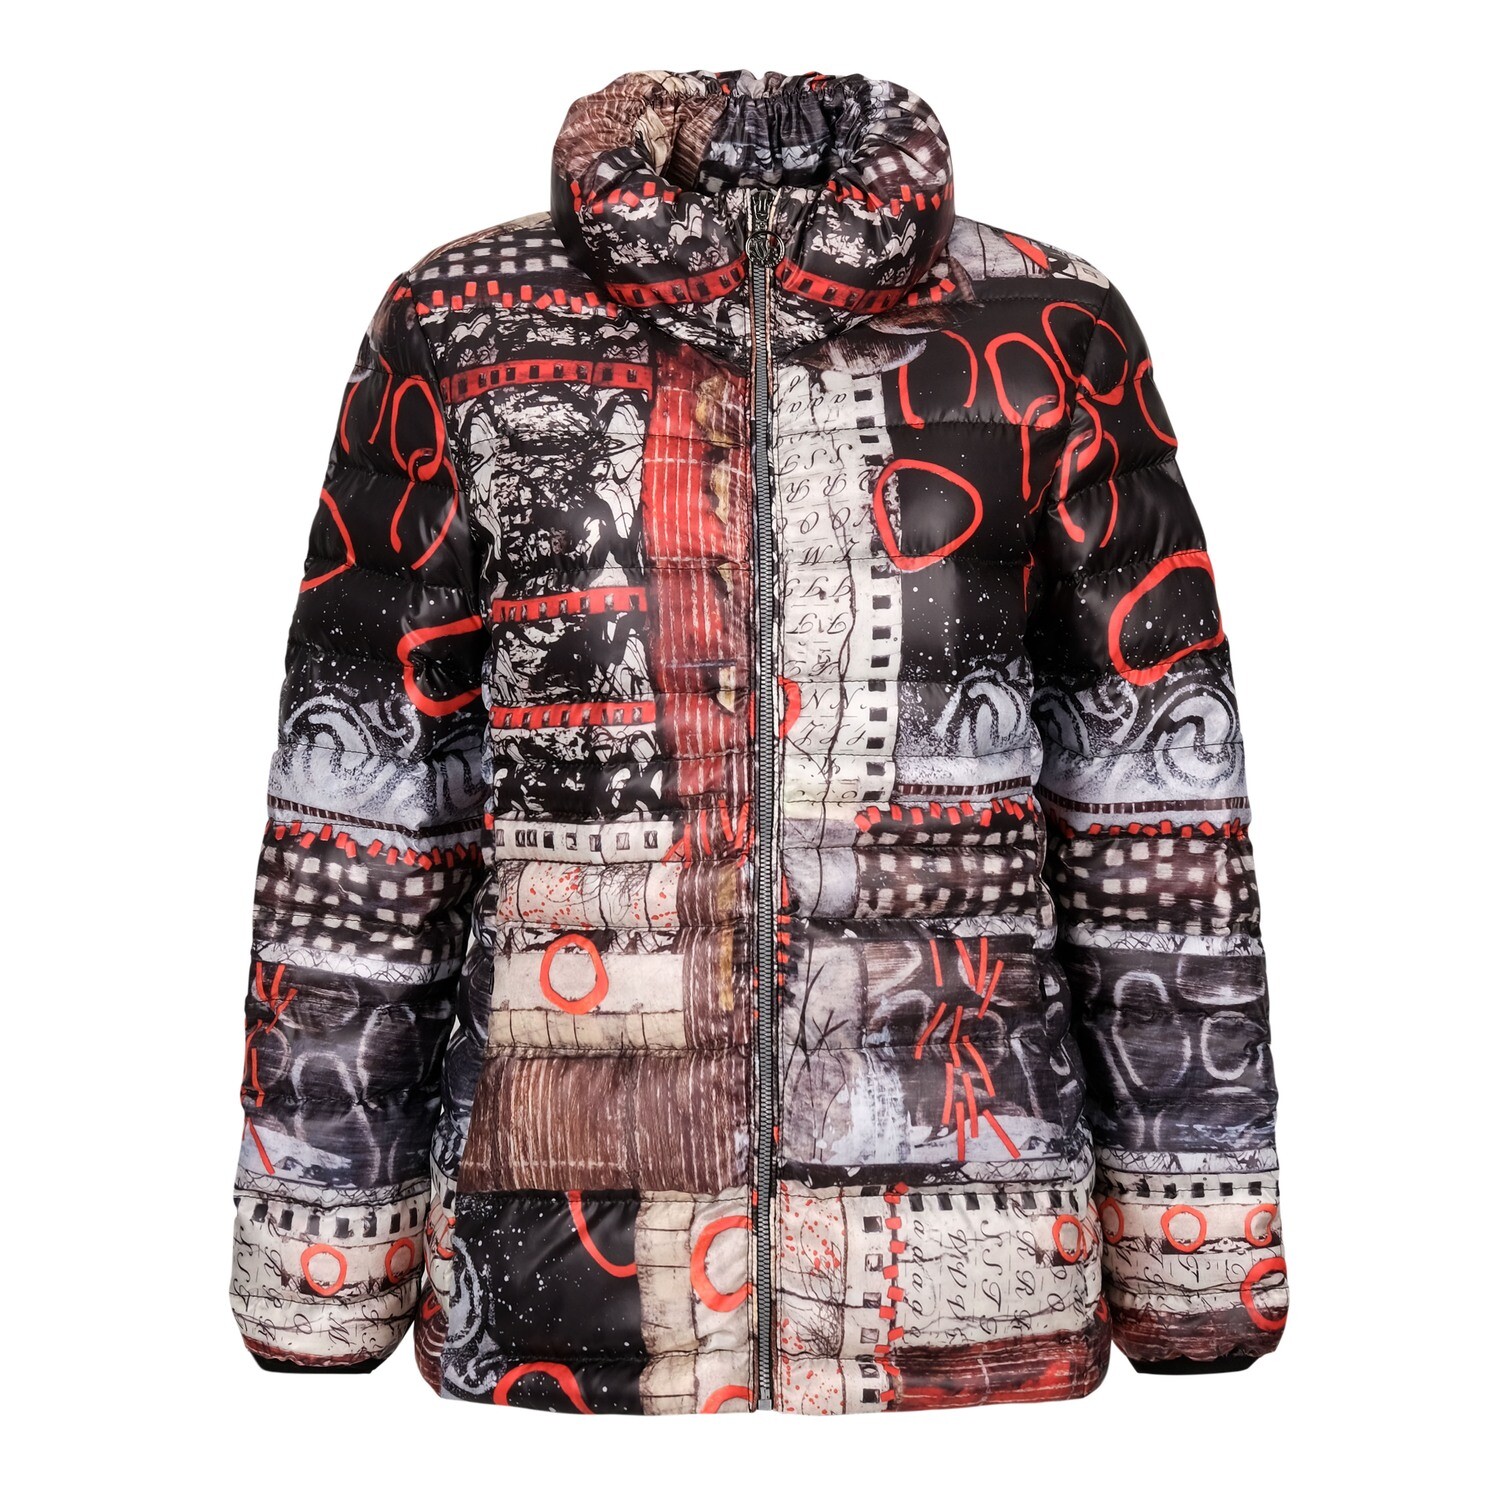 Simply Art Dolcezza: Rising Up In Color Puffer Short Coat (1 Left!)